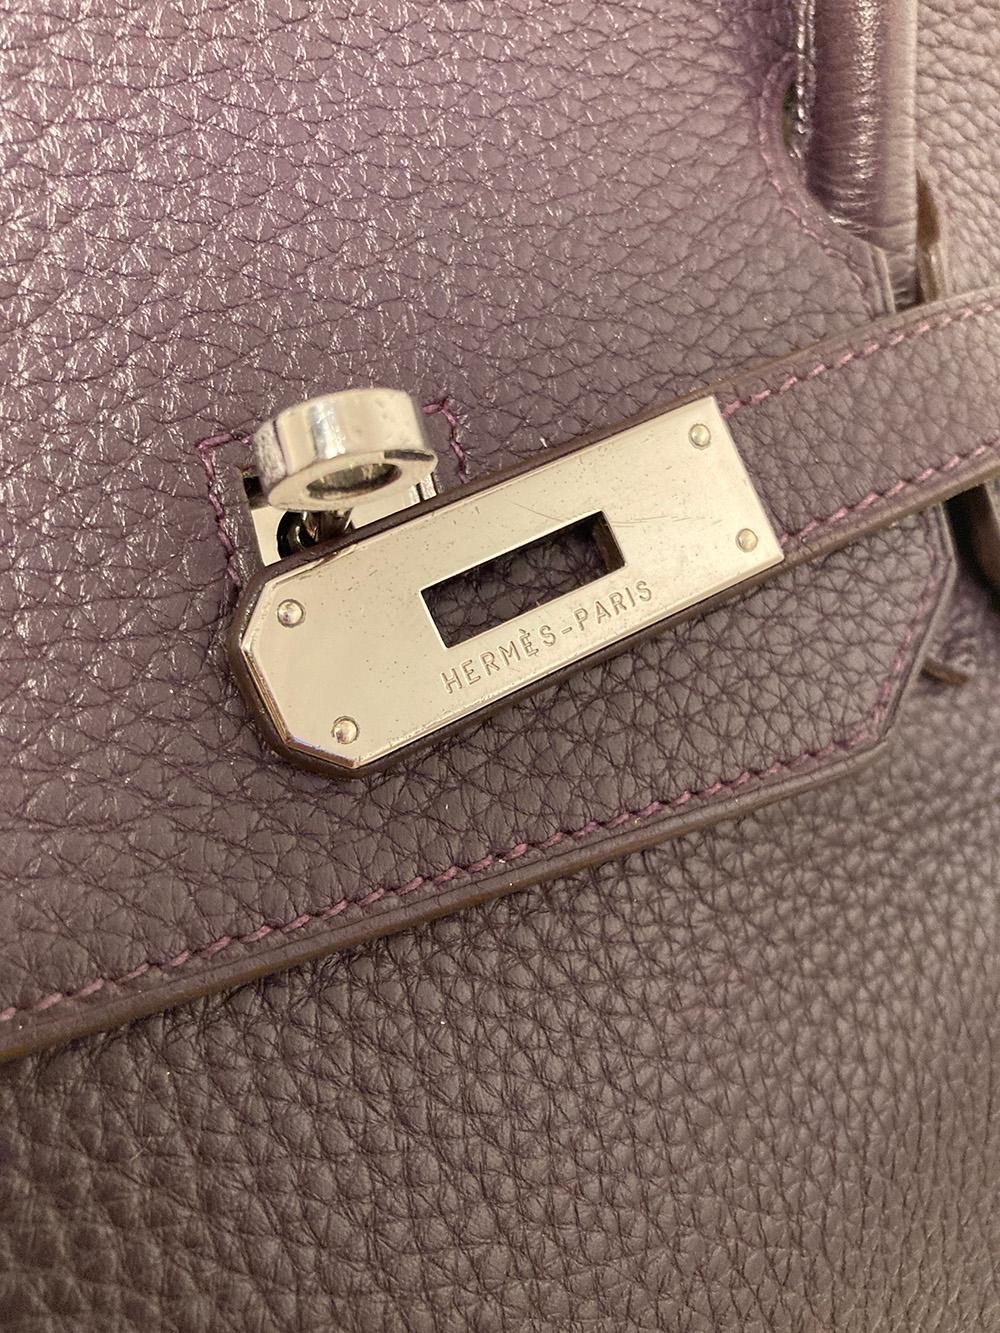 Hermes Raisin Purple Clemence Birkin 40 PDH In Excellent Condition For Sale In Philadelphia, PA